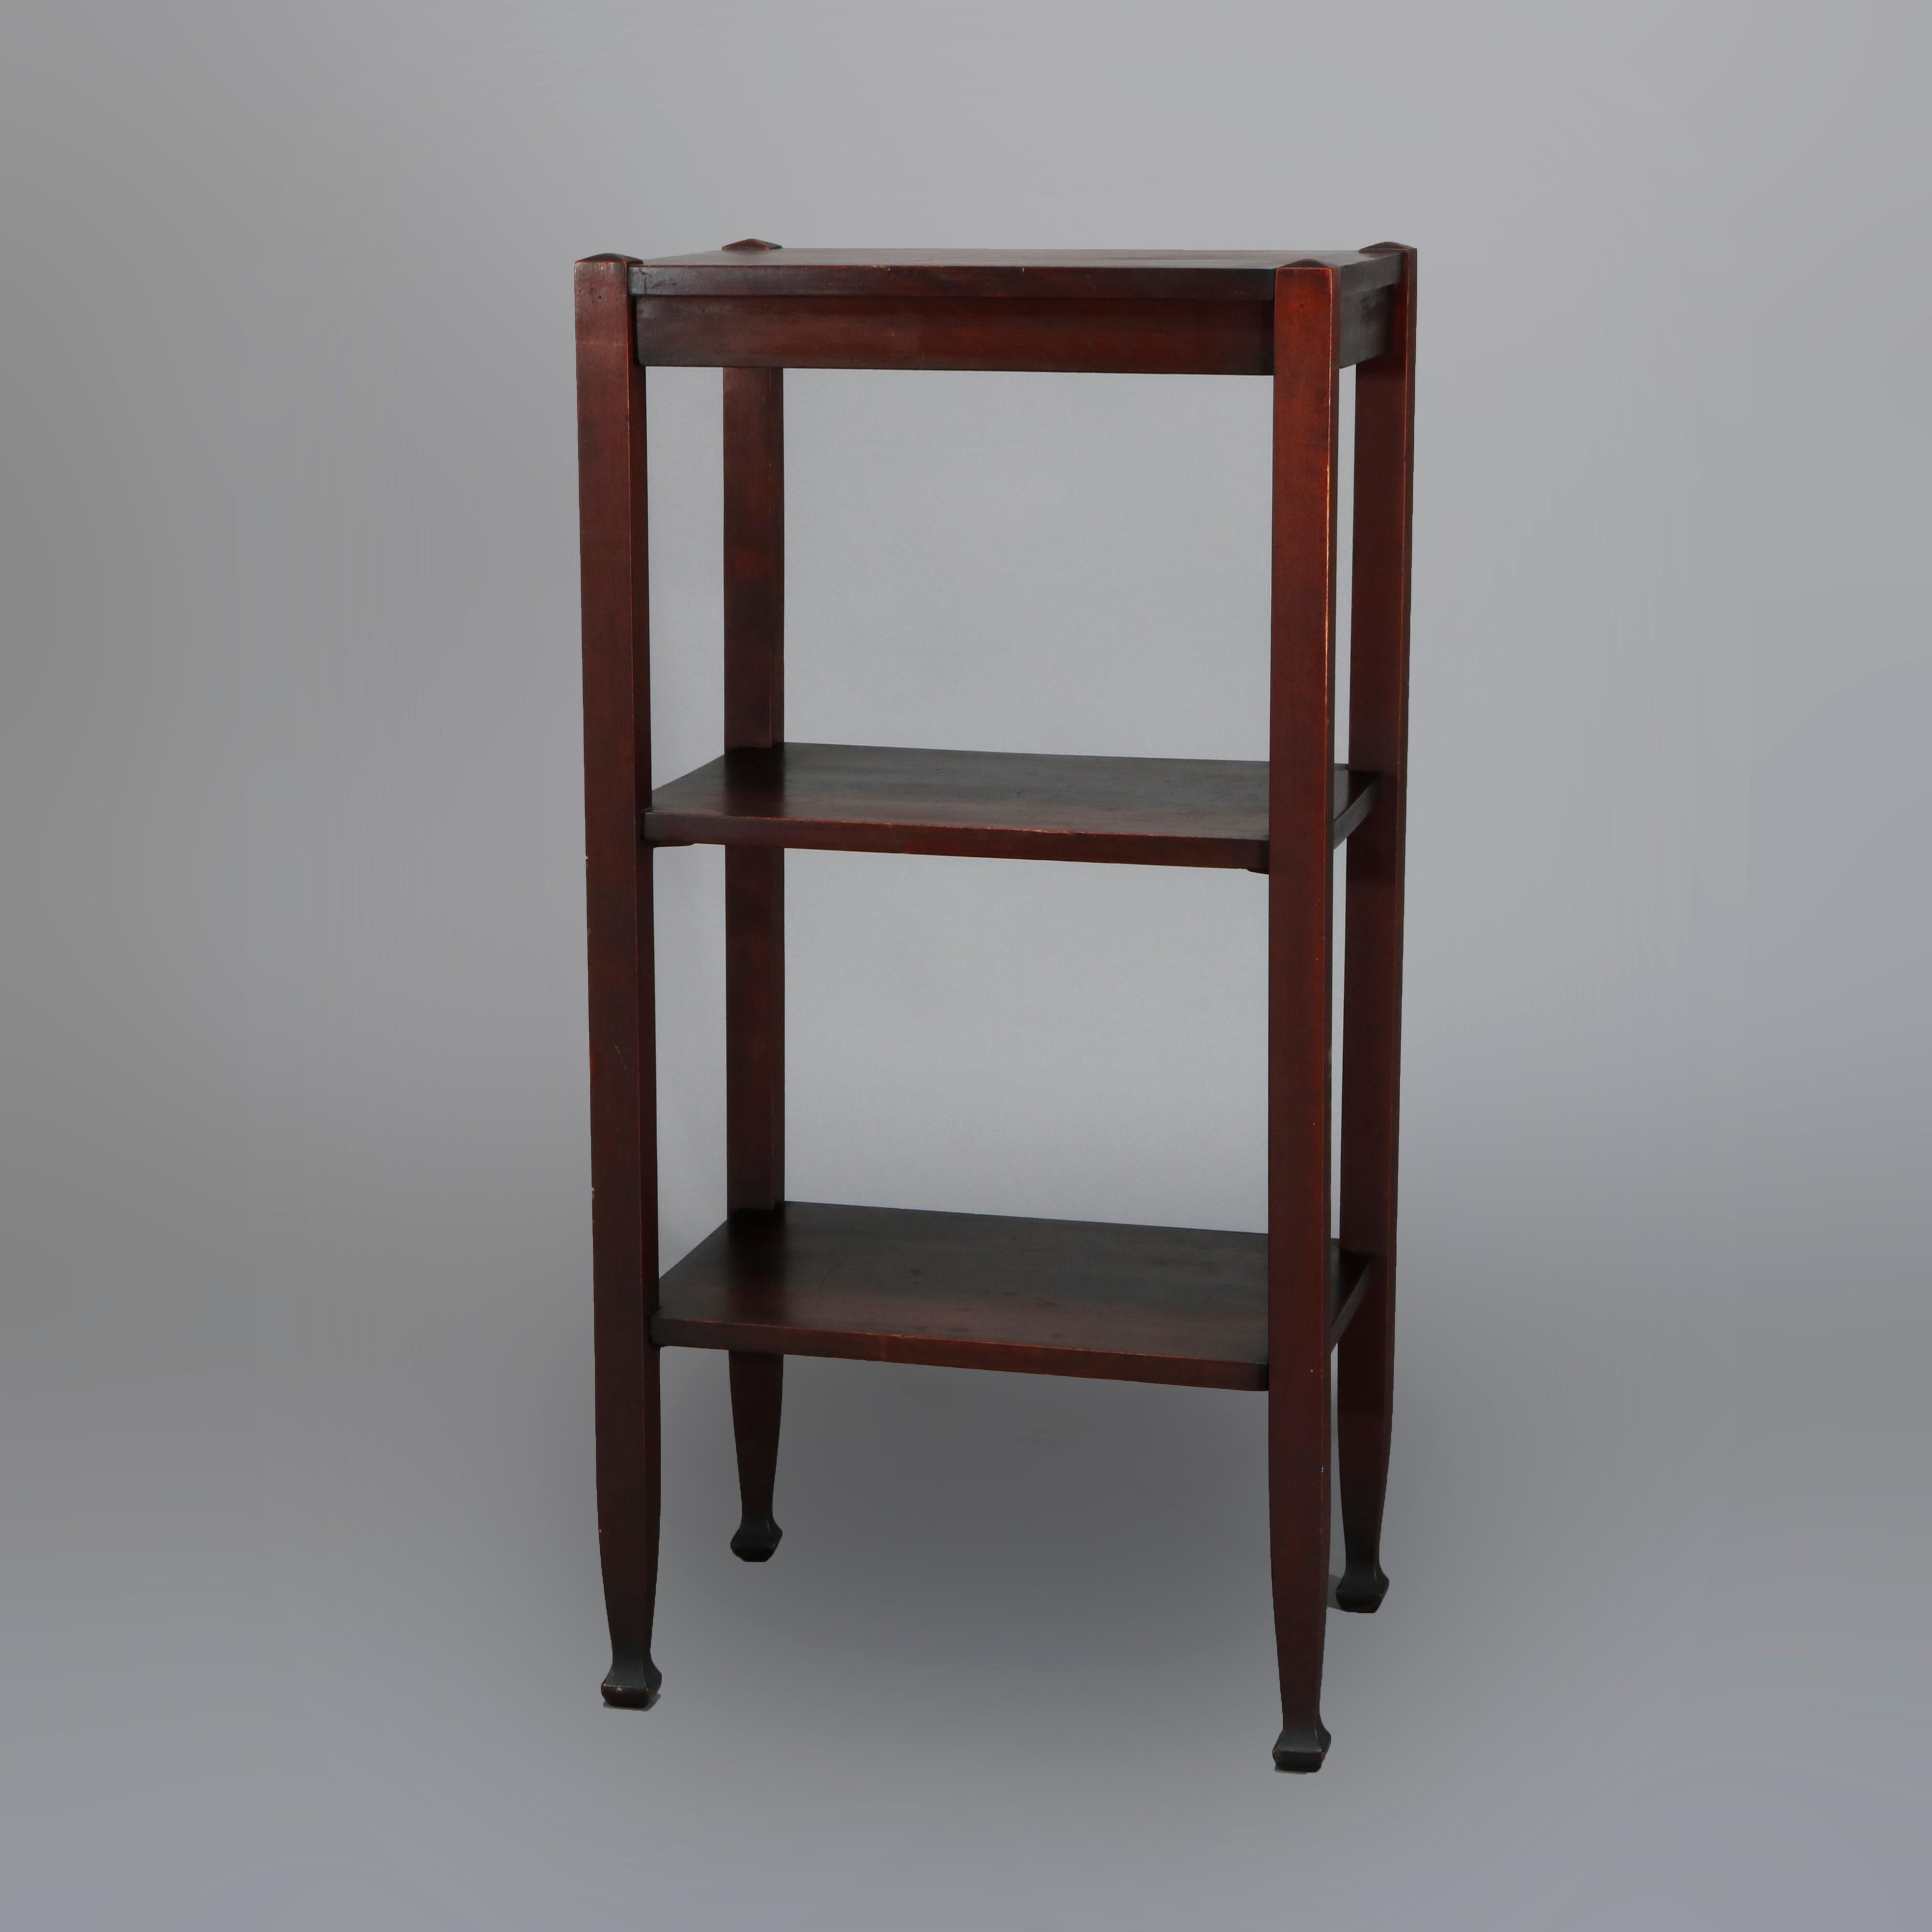 An antique Arts & Crafts pottery display stand by Lakeside Crafters offers upper display over two additional shelves, raised on square and straight legs having McMurdle feet, without label, circa 1910

Measures: 36.25